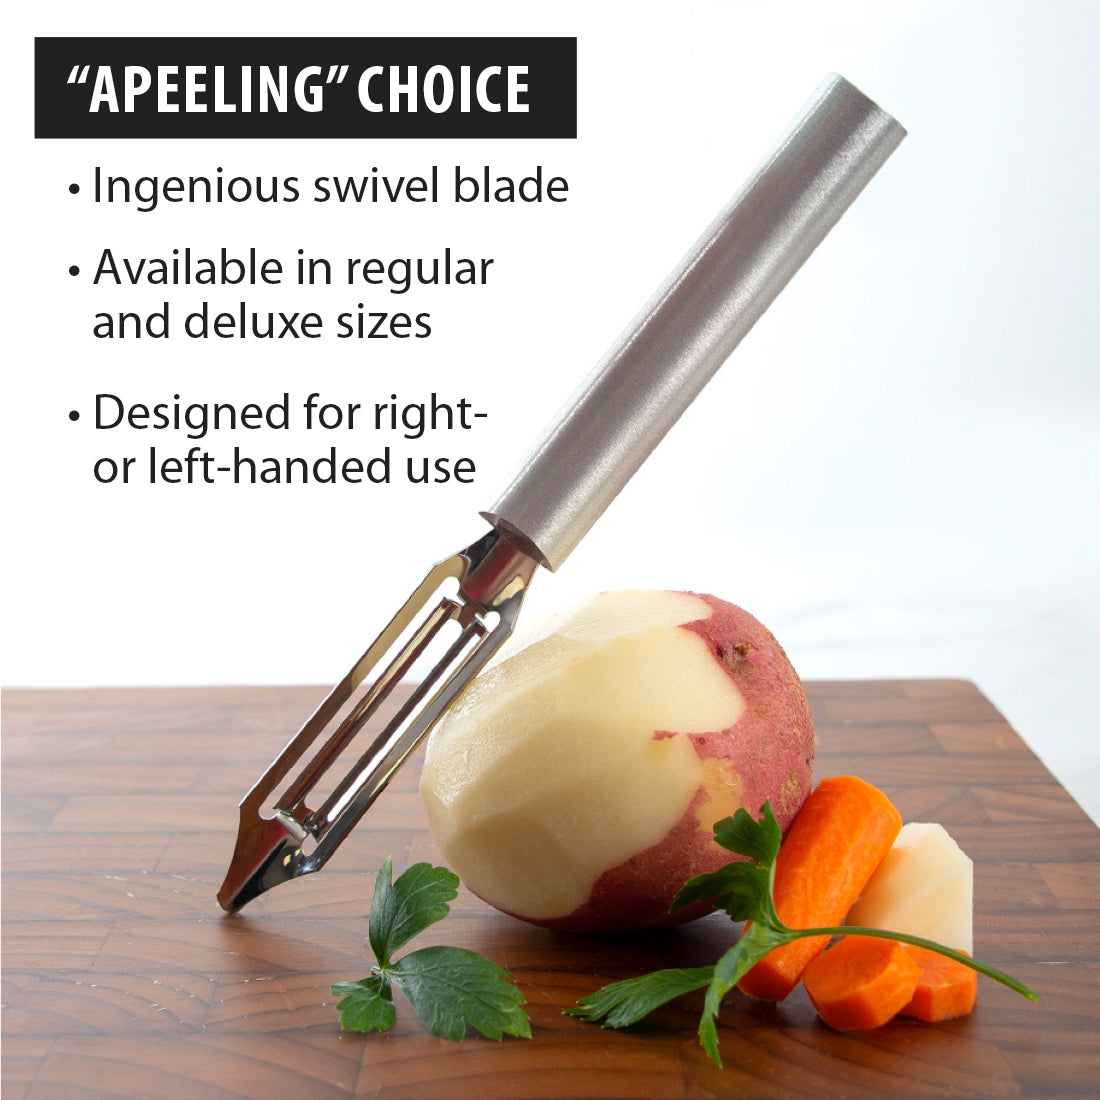 The Absolute Best Uses For Your Vegetable Peeler